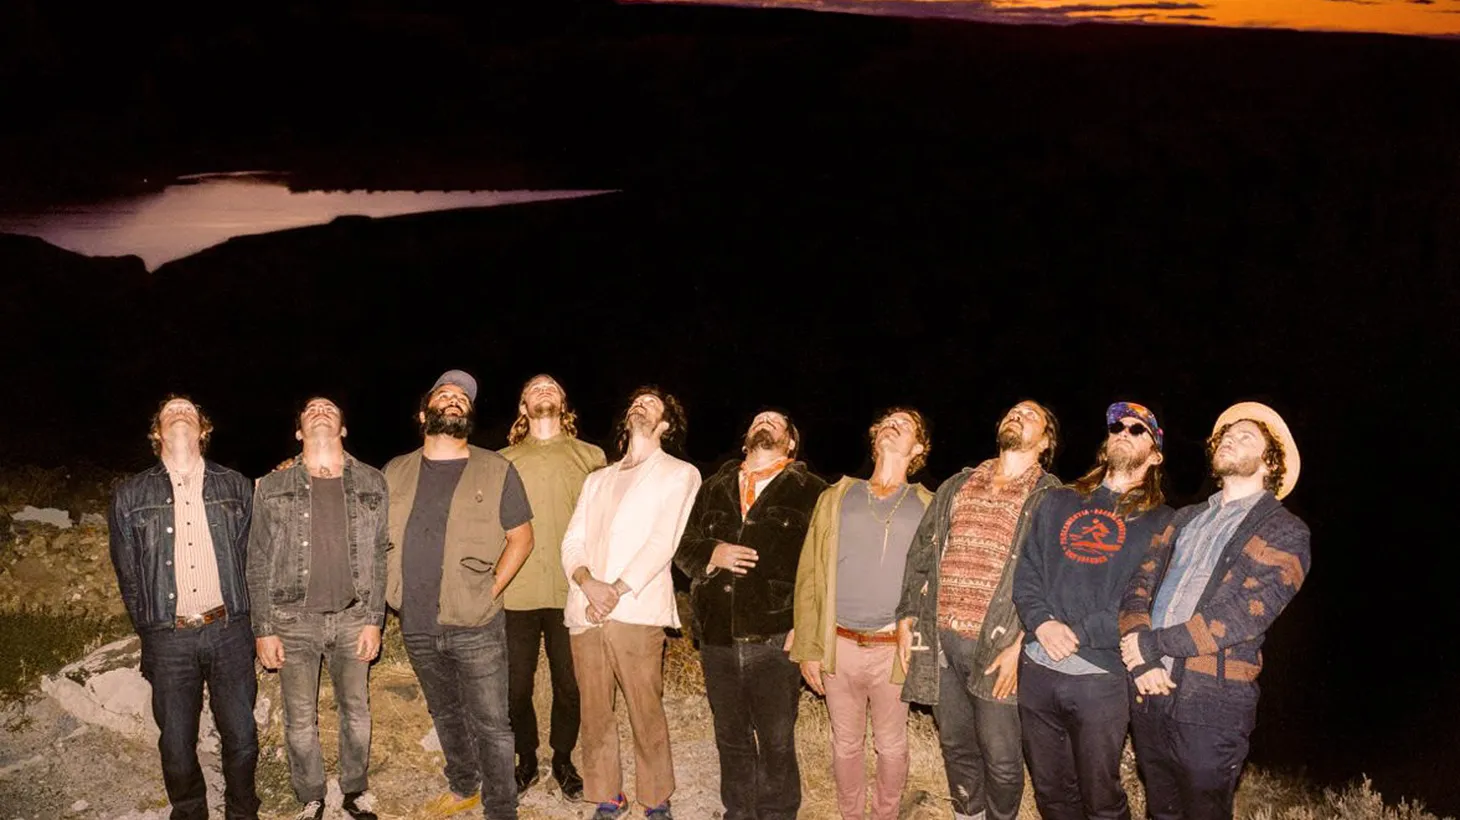 Edward Sharpe and the Magnetic Zeros is an ever-evolving group of merry music makers who make a triumphant return on their fourth album, PersonA.